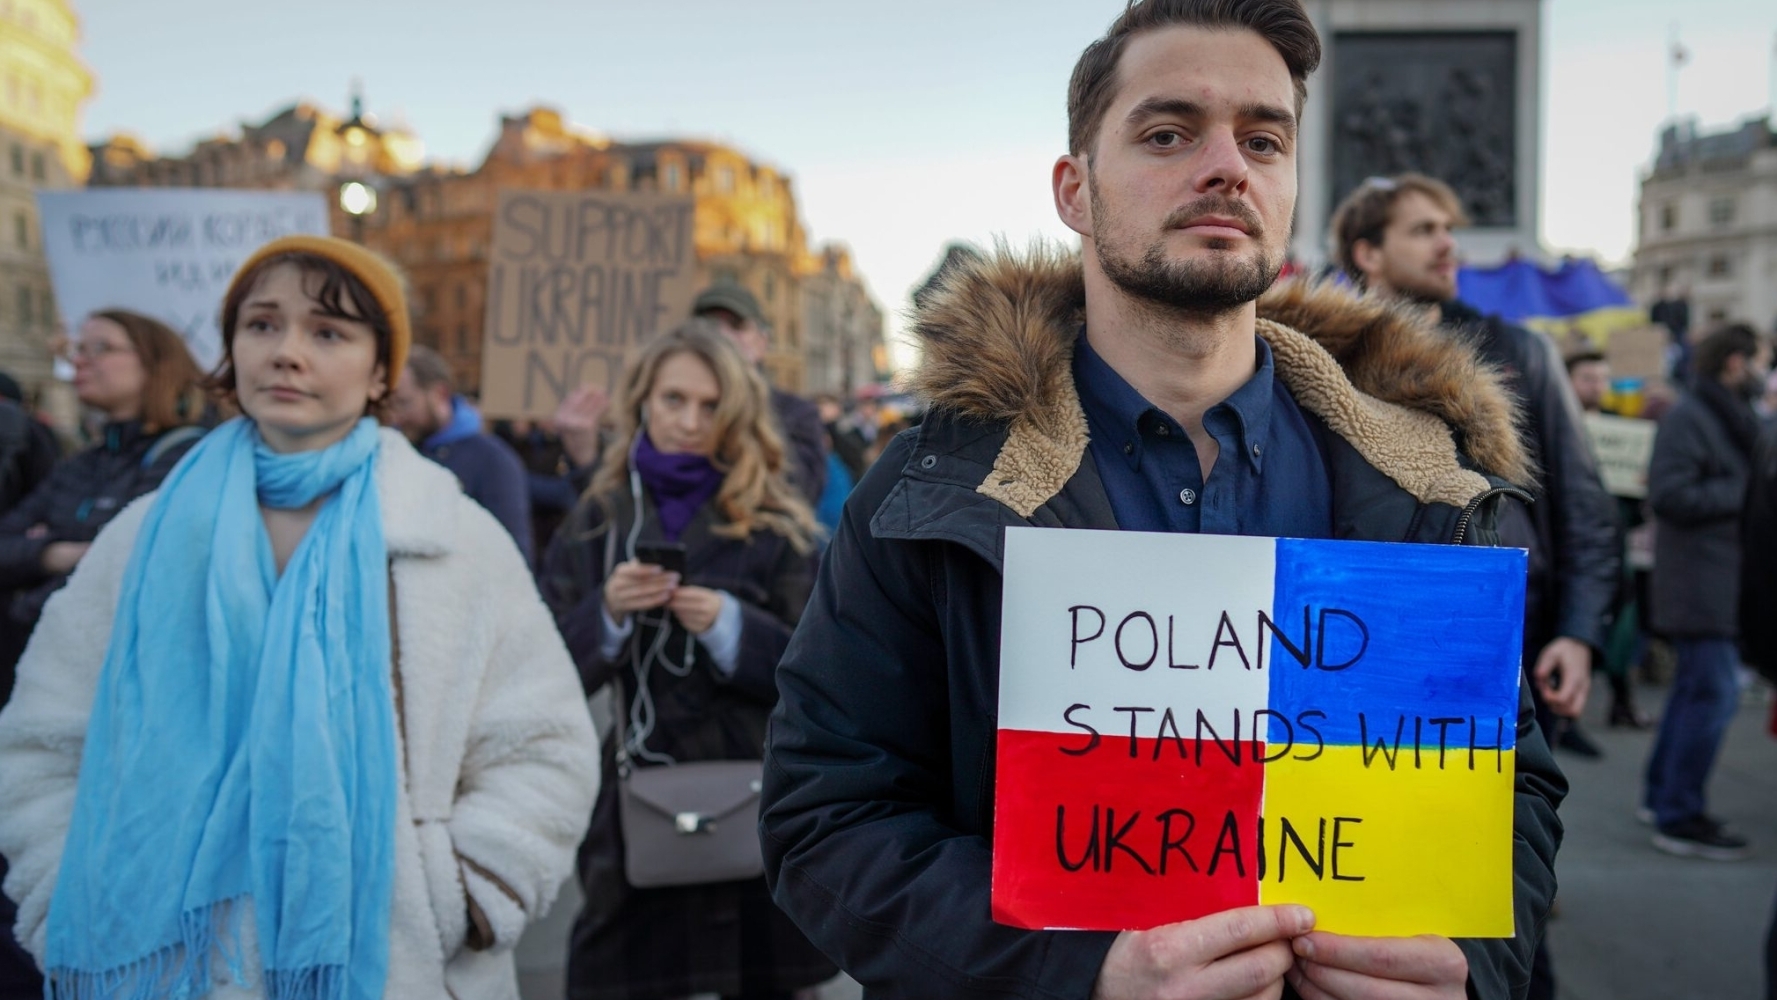 Ukrainian refugees in Poland may lose their payments. Do the Poles support this?